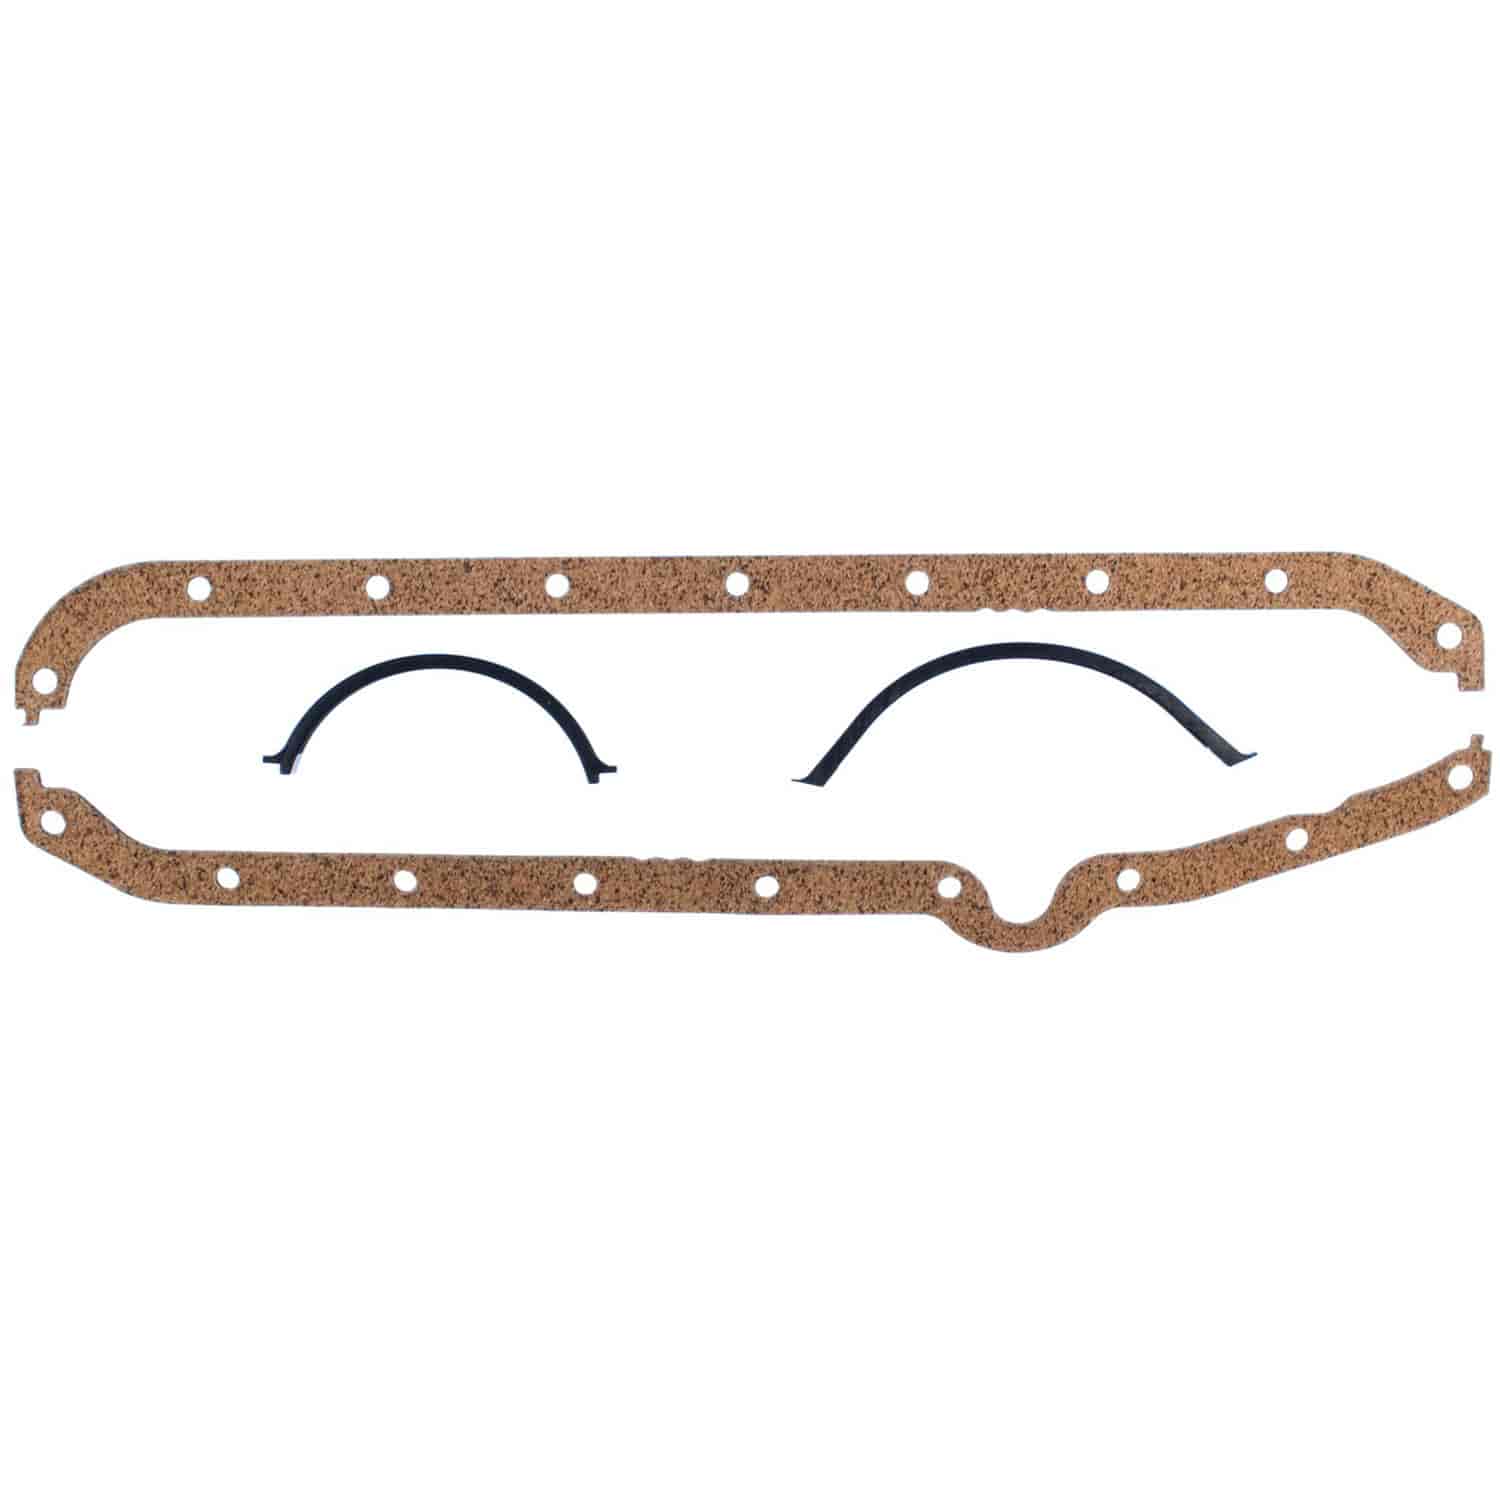 Oil Pan Gasket Set 1957-1974 Small Block Chevy 265/283/307/327/350/400 in Cork with Metal Carrier